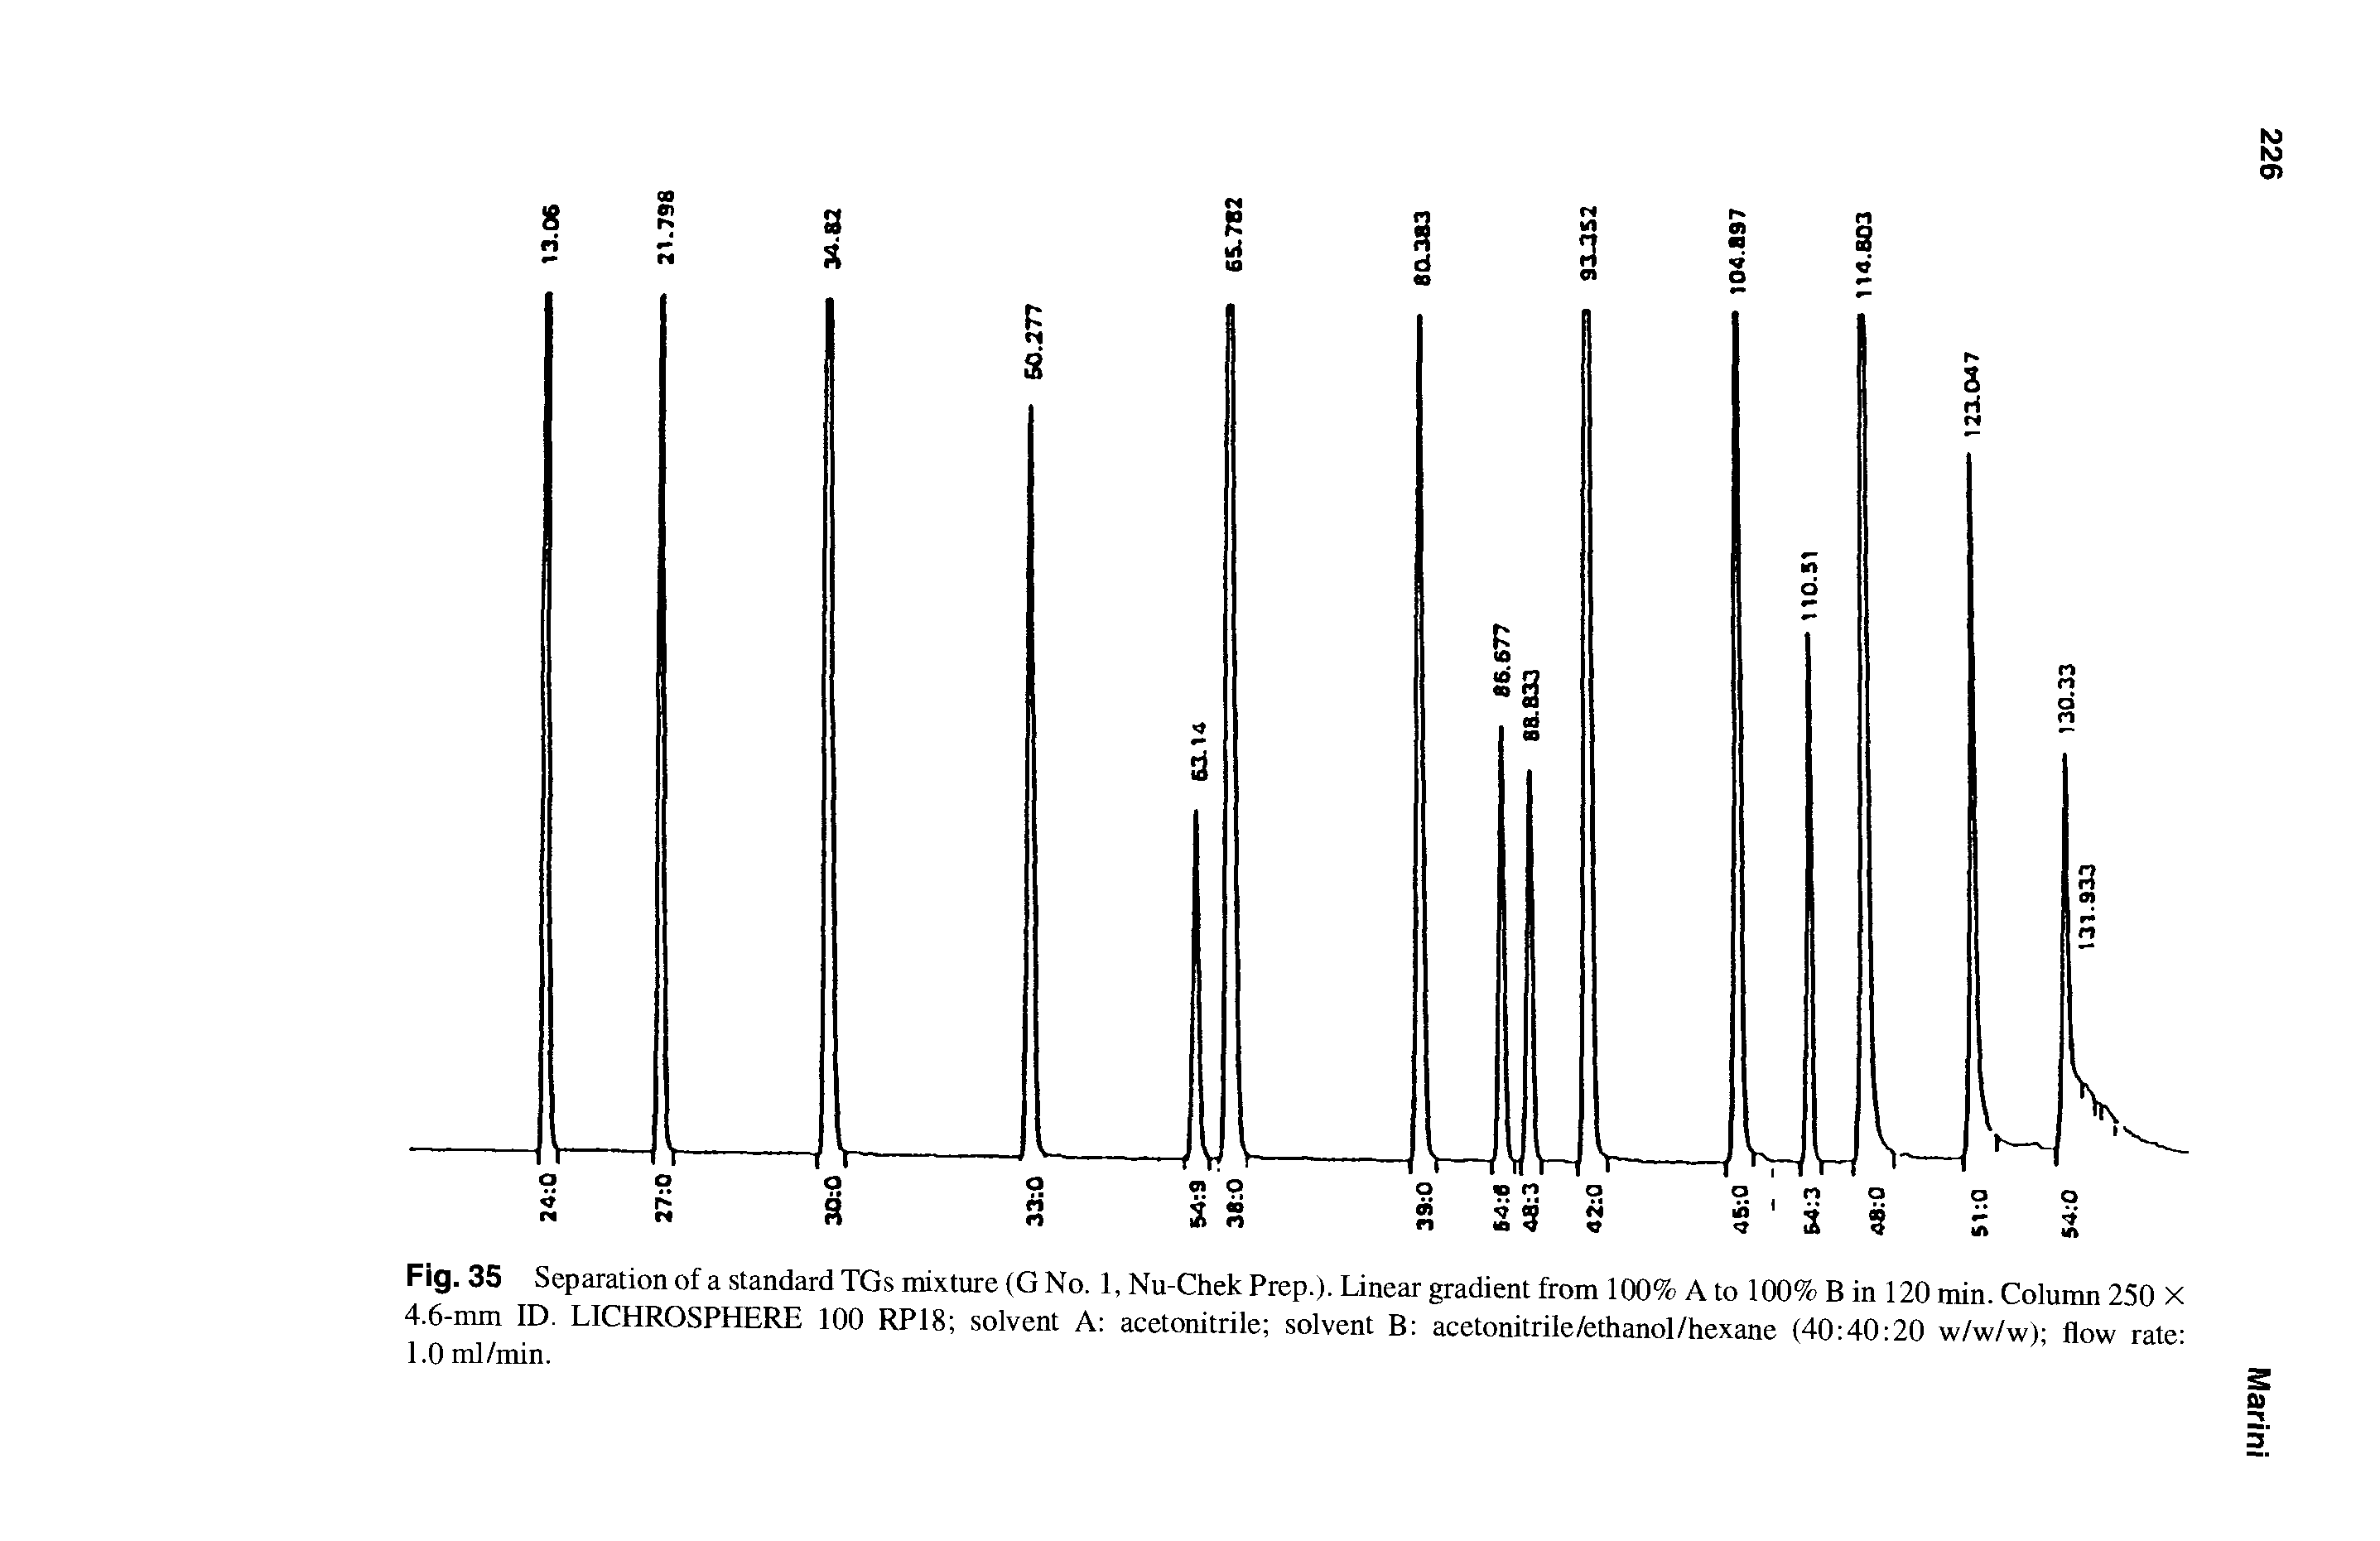 Fig. 35 Separation of a standard TGs mixture (G No. 1, Nu-ChekPrep.). Linear gradient from 100% A to 100% B in 120 min. Column 250 X 4.6-mm ID. LICHROSPHERE 100 RP18 solvent A acetonitrile solvent B acetonitrile/ethanol/hexane (40 40 20 w/w/w) flow rate l.Oml/min.